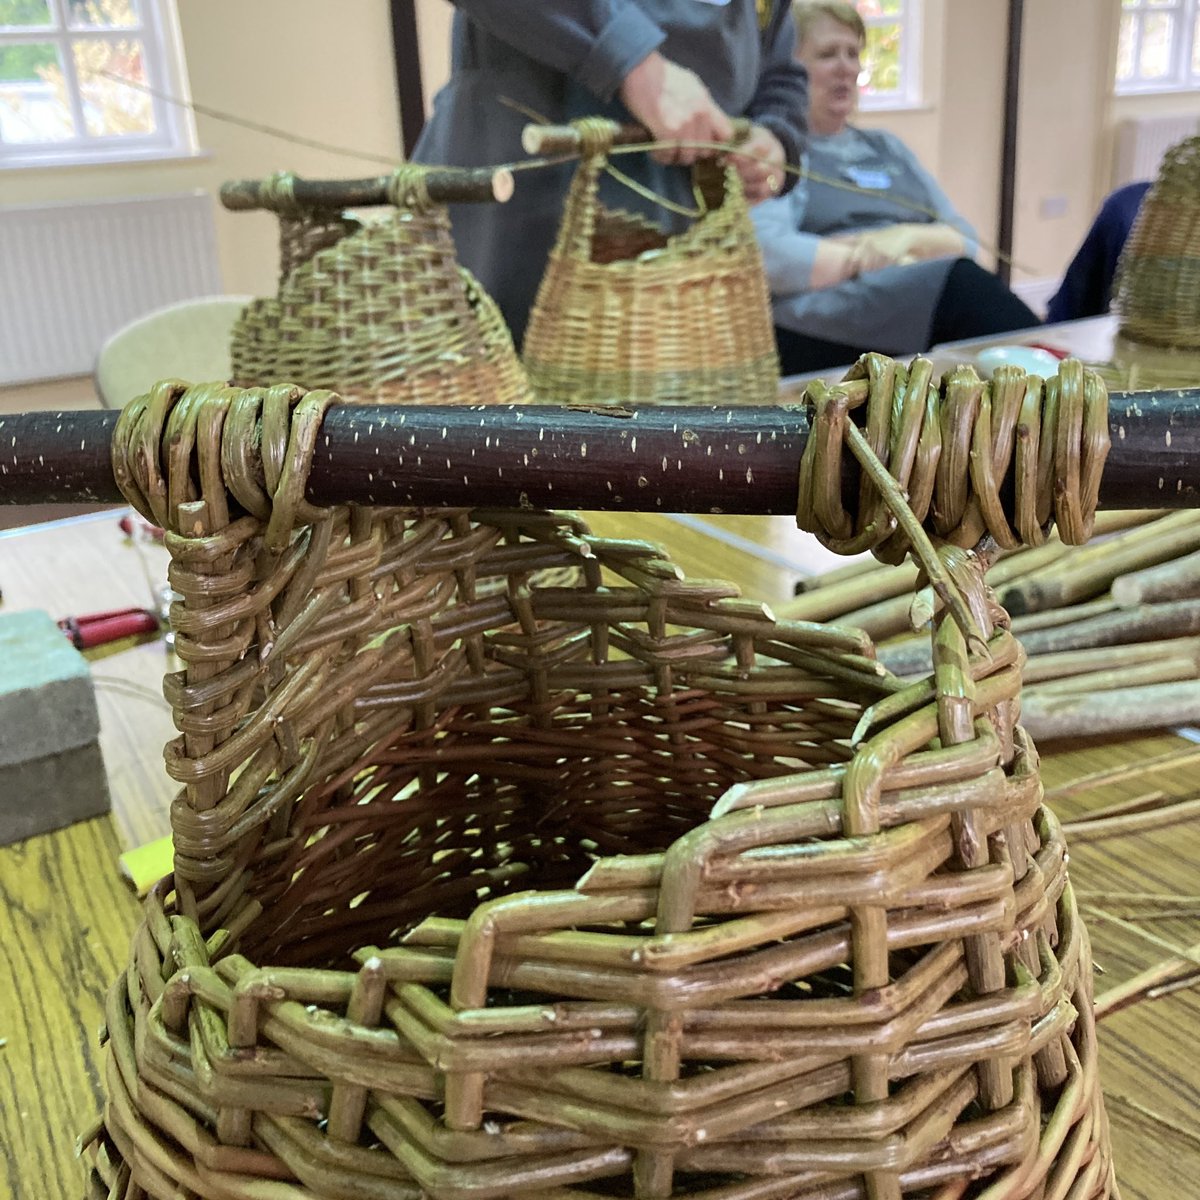 Here are a few snaps from Saturday's WILLOW BASKET WORKSHOP where our fabulous workshoppers made these super special asymmetric baskets...

#tlpcraftworkshops #willowweaving #willowbaskets #basketmaking #basketworkshops #asymmetricbasket #craftworkshops #newskills